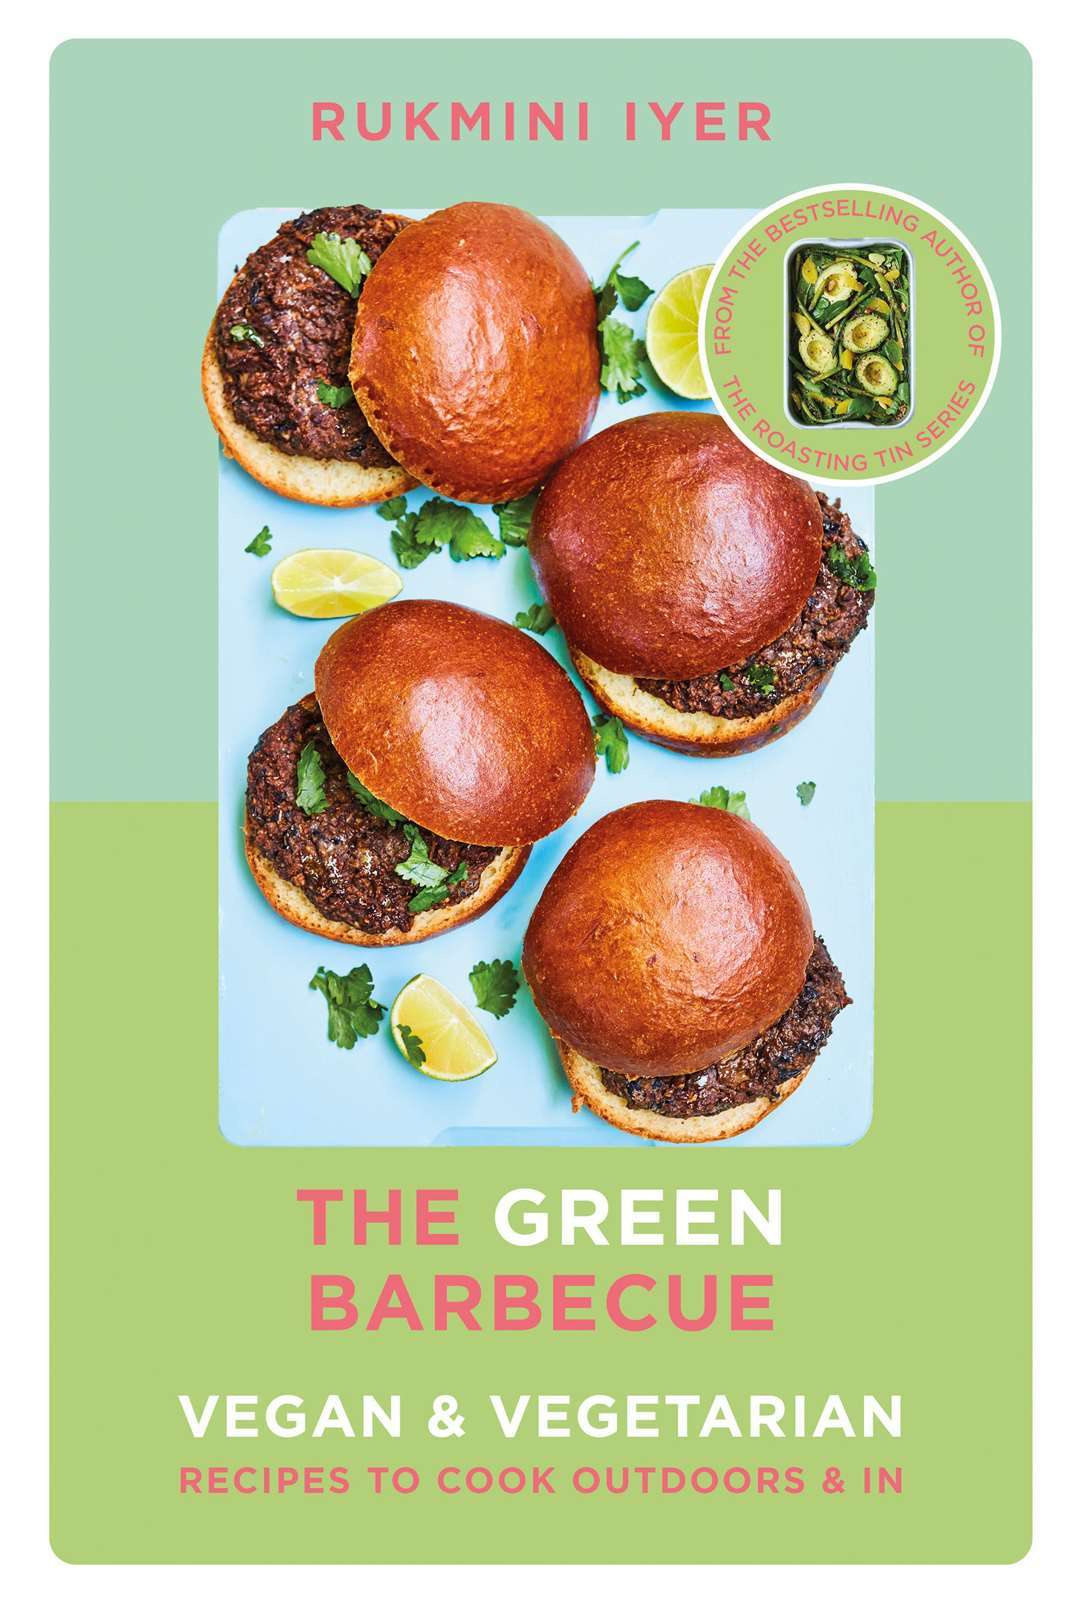 The Green Barbecue: Vegan & Vegetarian Recipes To Cook Outdoors & In by Rukmini Iyer (Square Peg, £17.99). Picture: David Loftus/PA